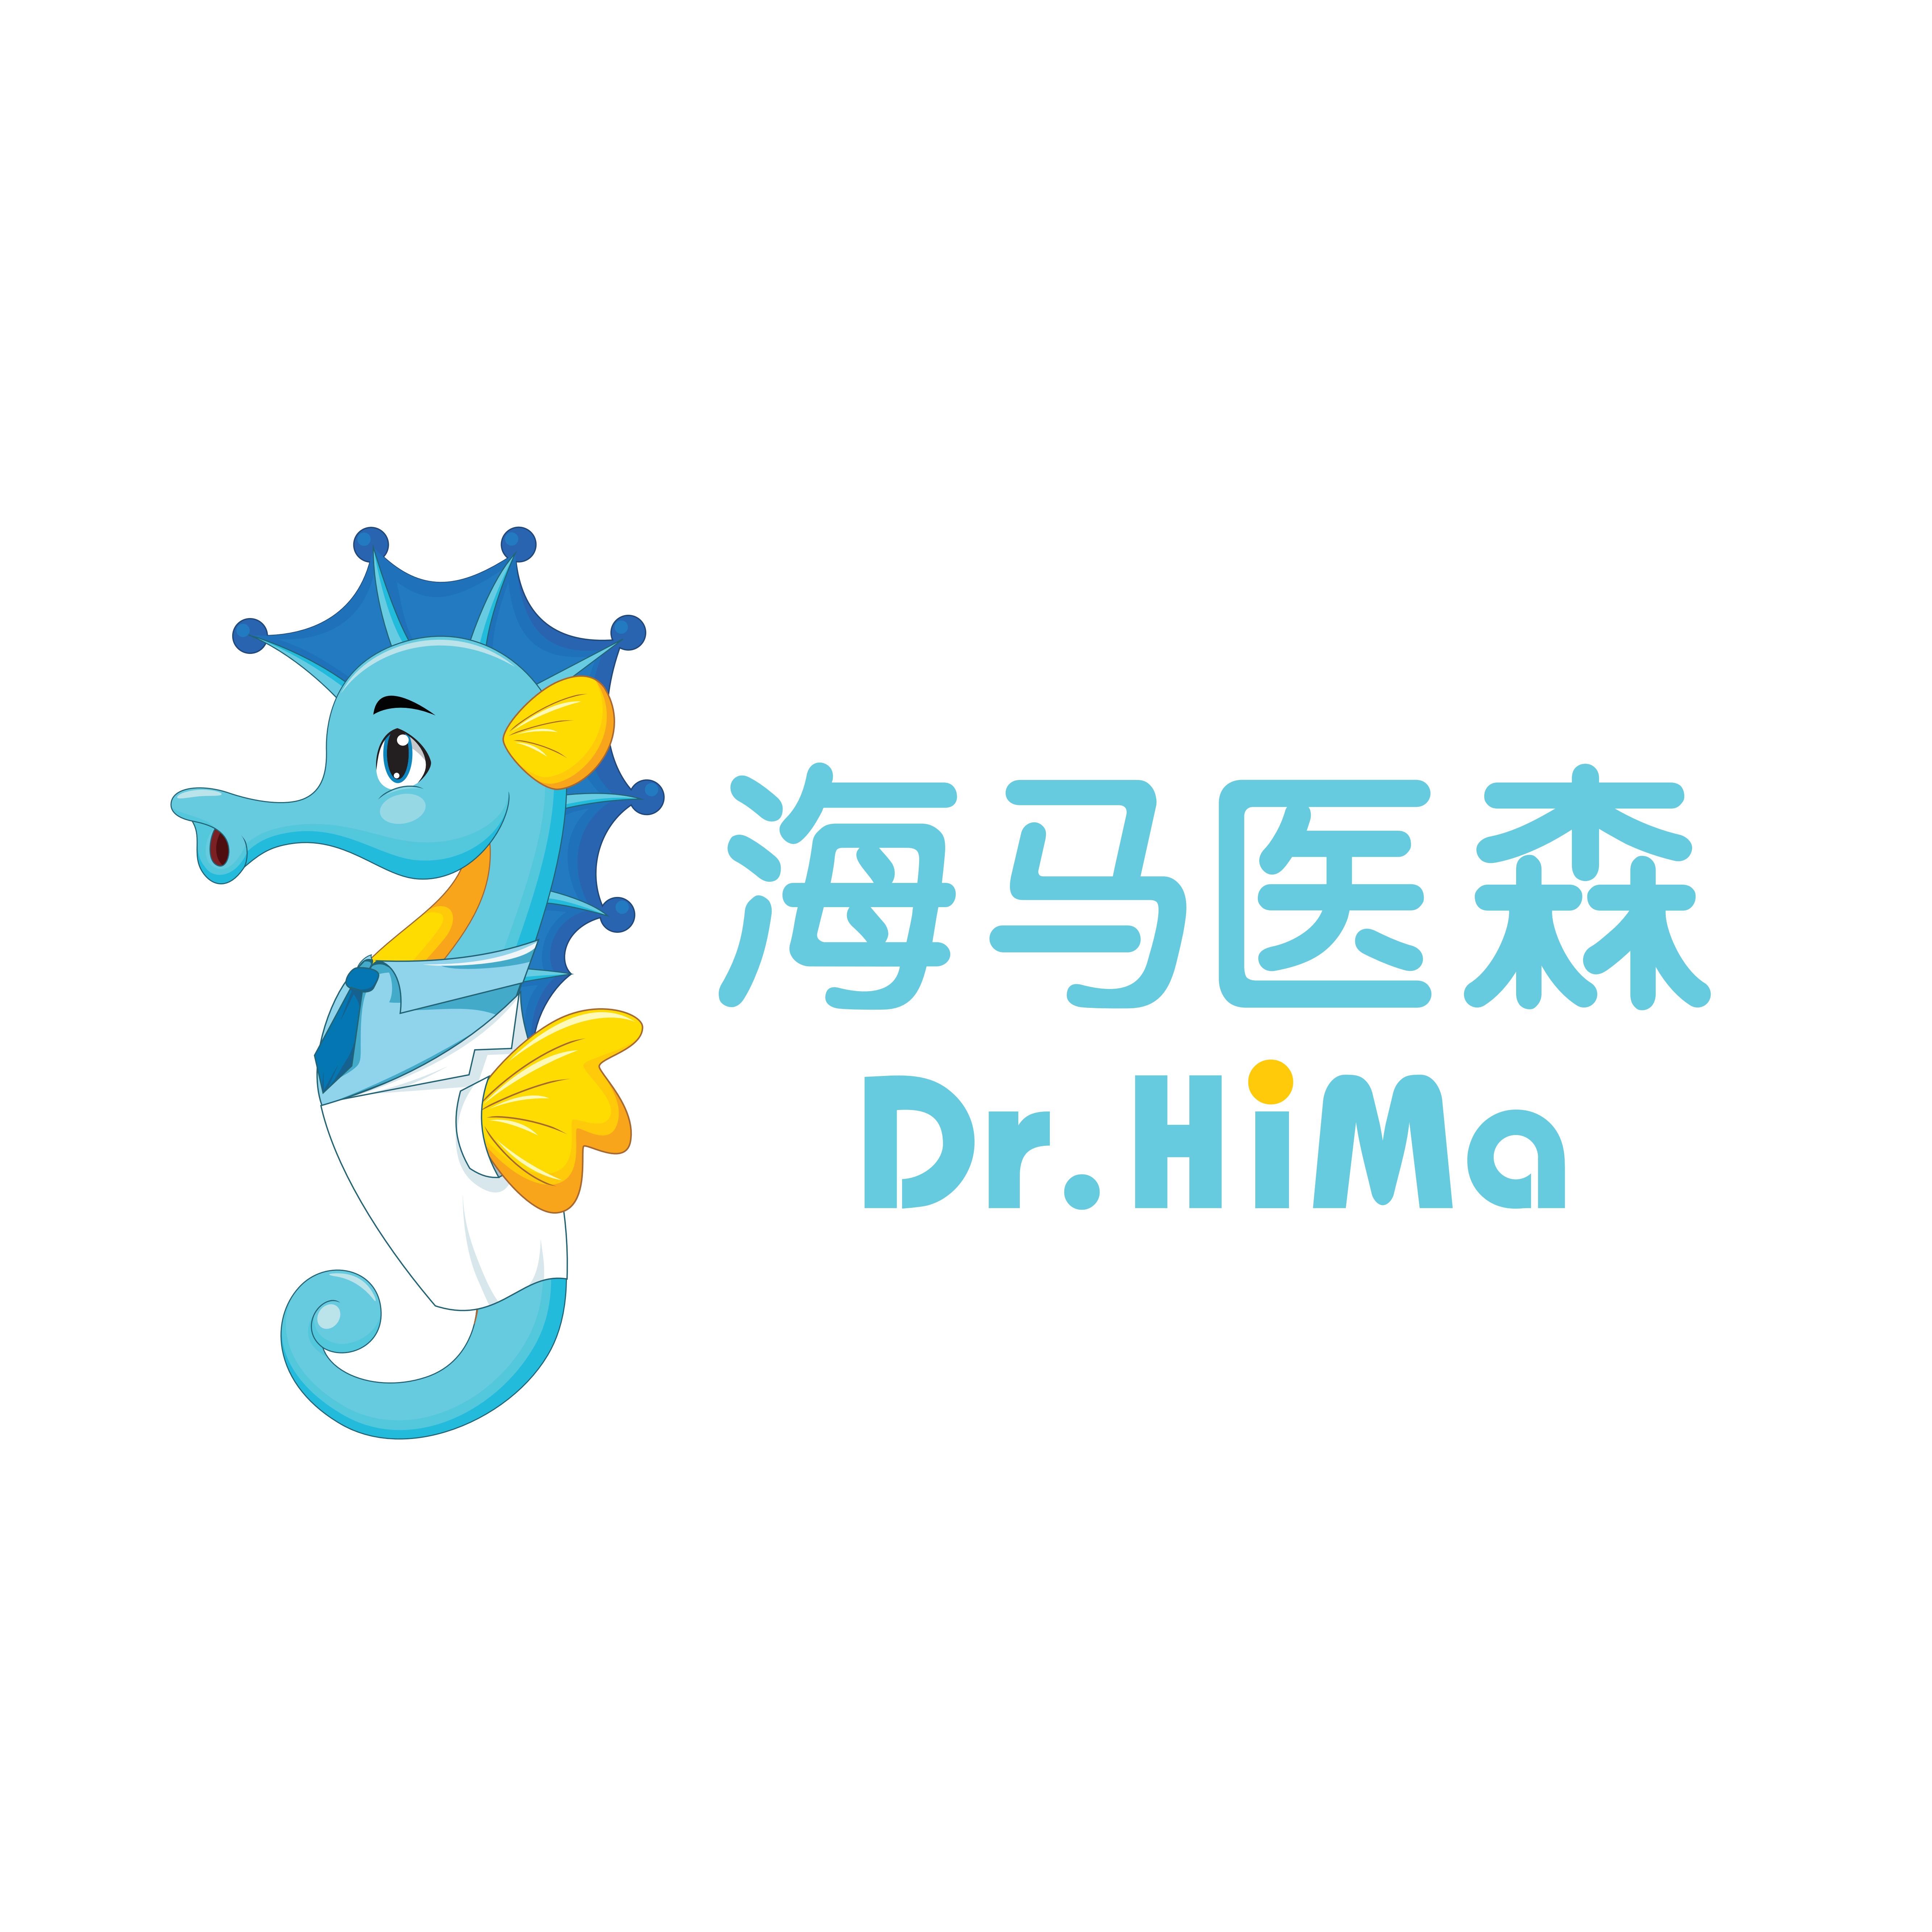 Dr.Hima, a new retail medical home use consumables brand